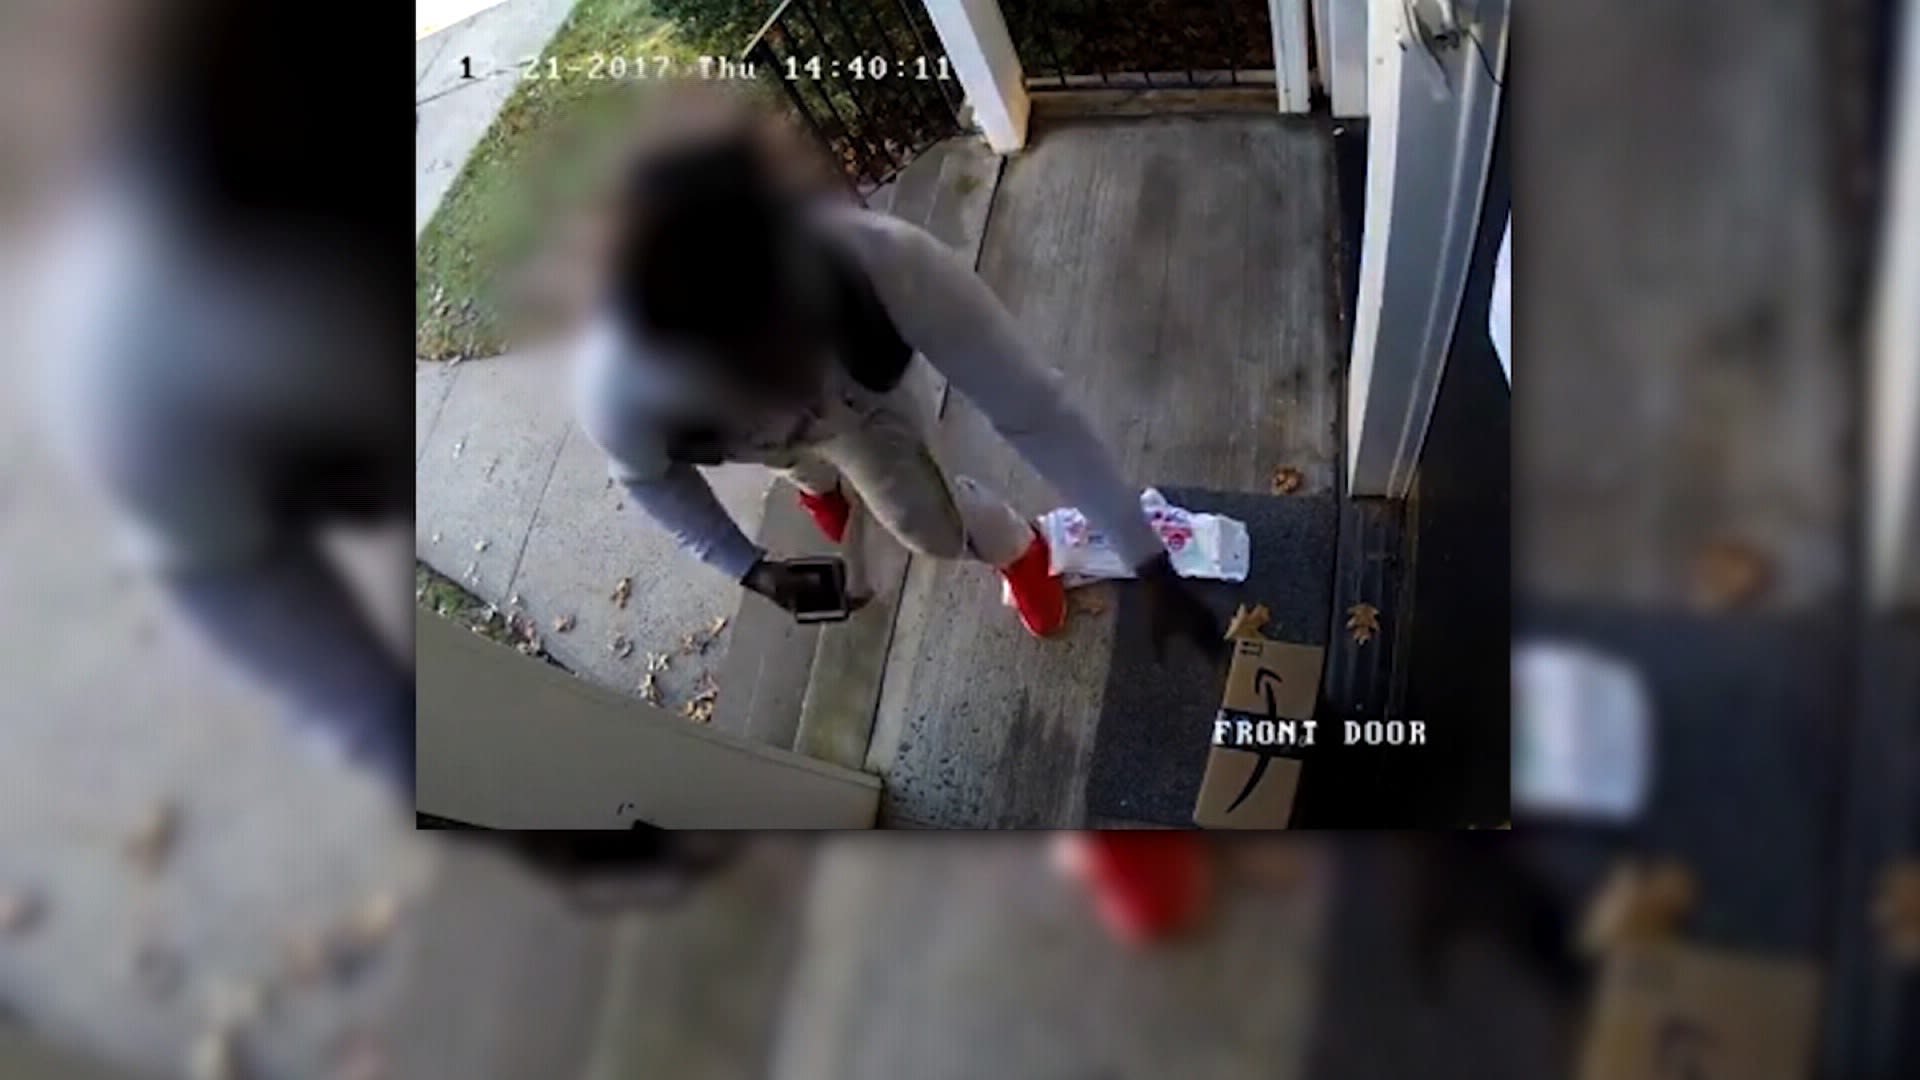 Watch the latest Glitter Bomb dish out sweet revenge on package thieves